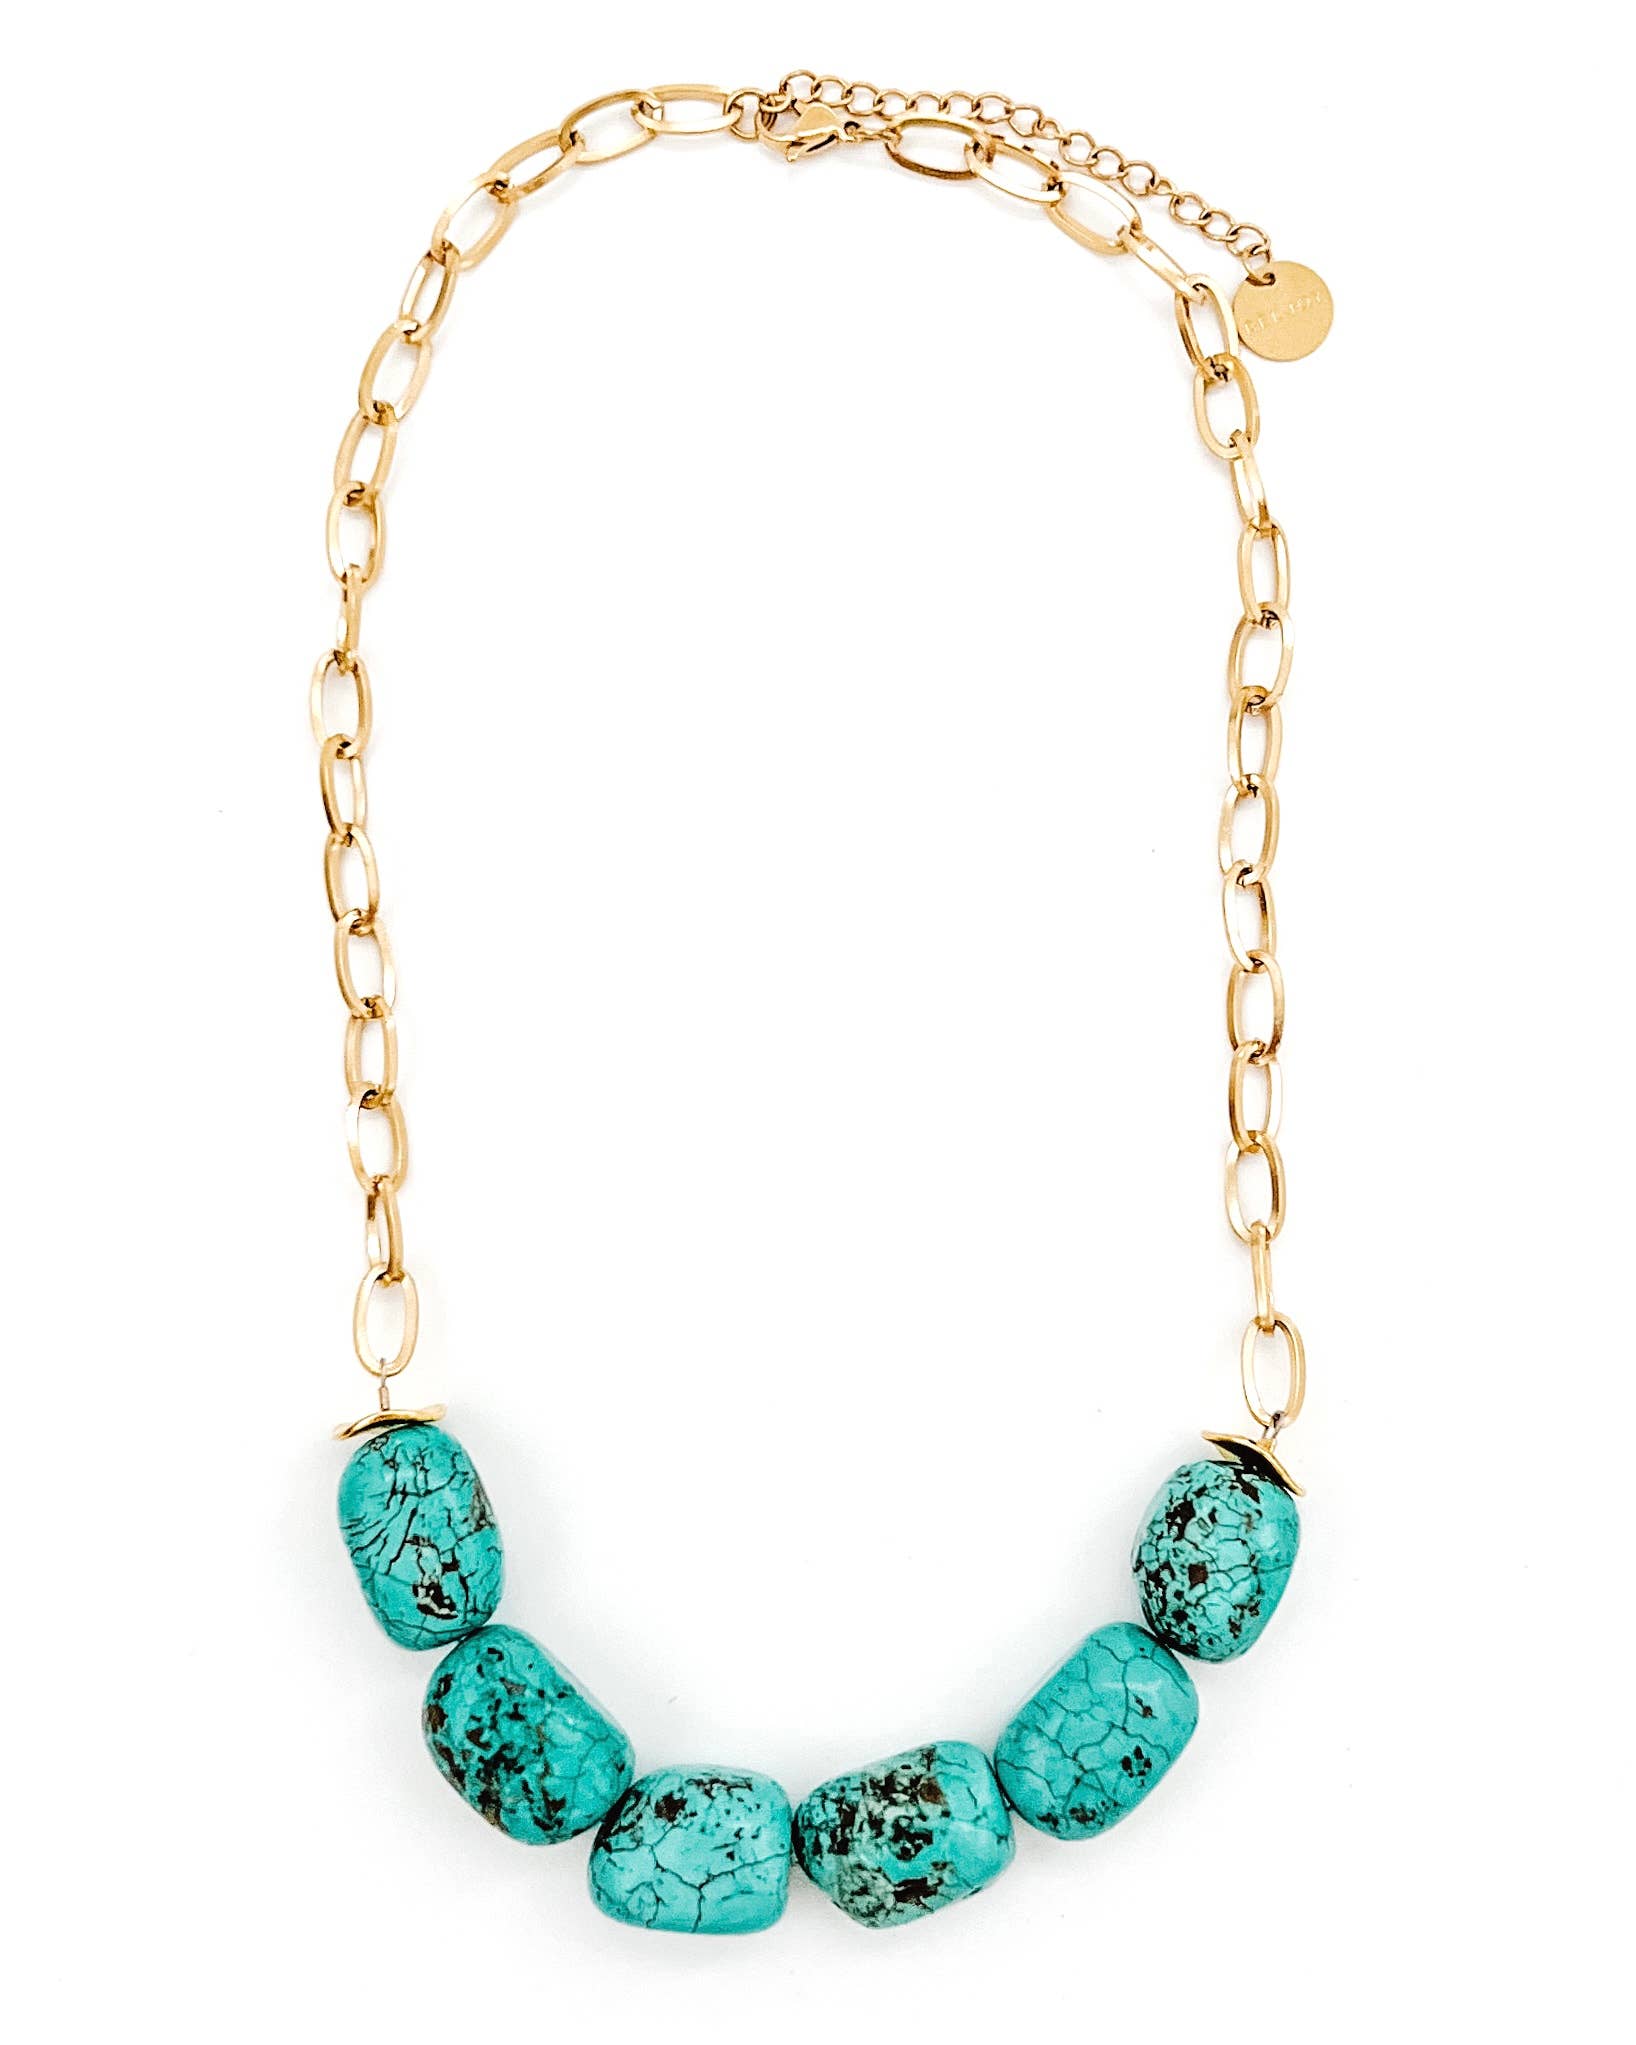 Chanler Beaded Chain Necklace || Choose Style: BLUE LACE AGATE